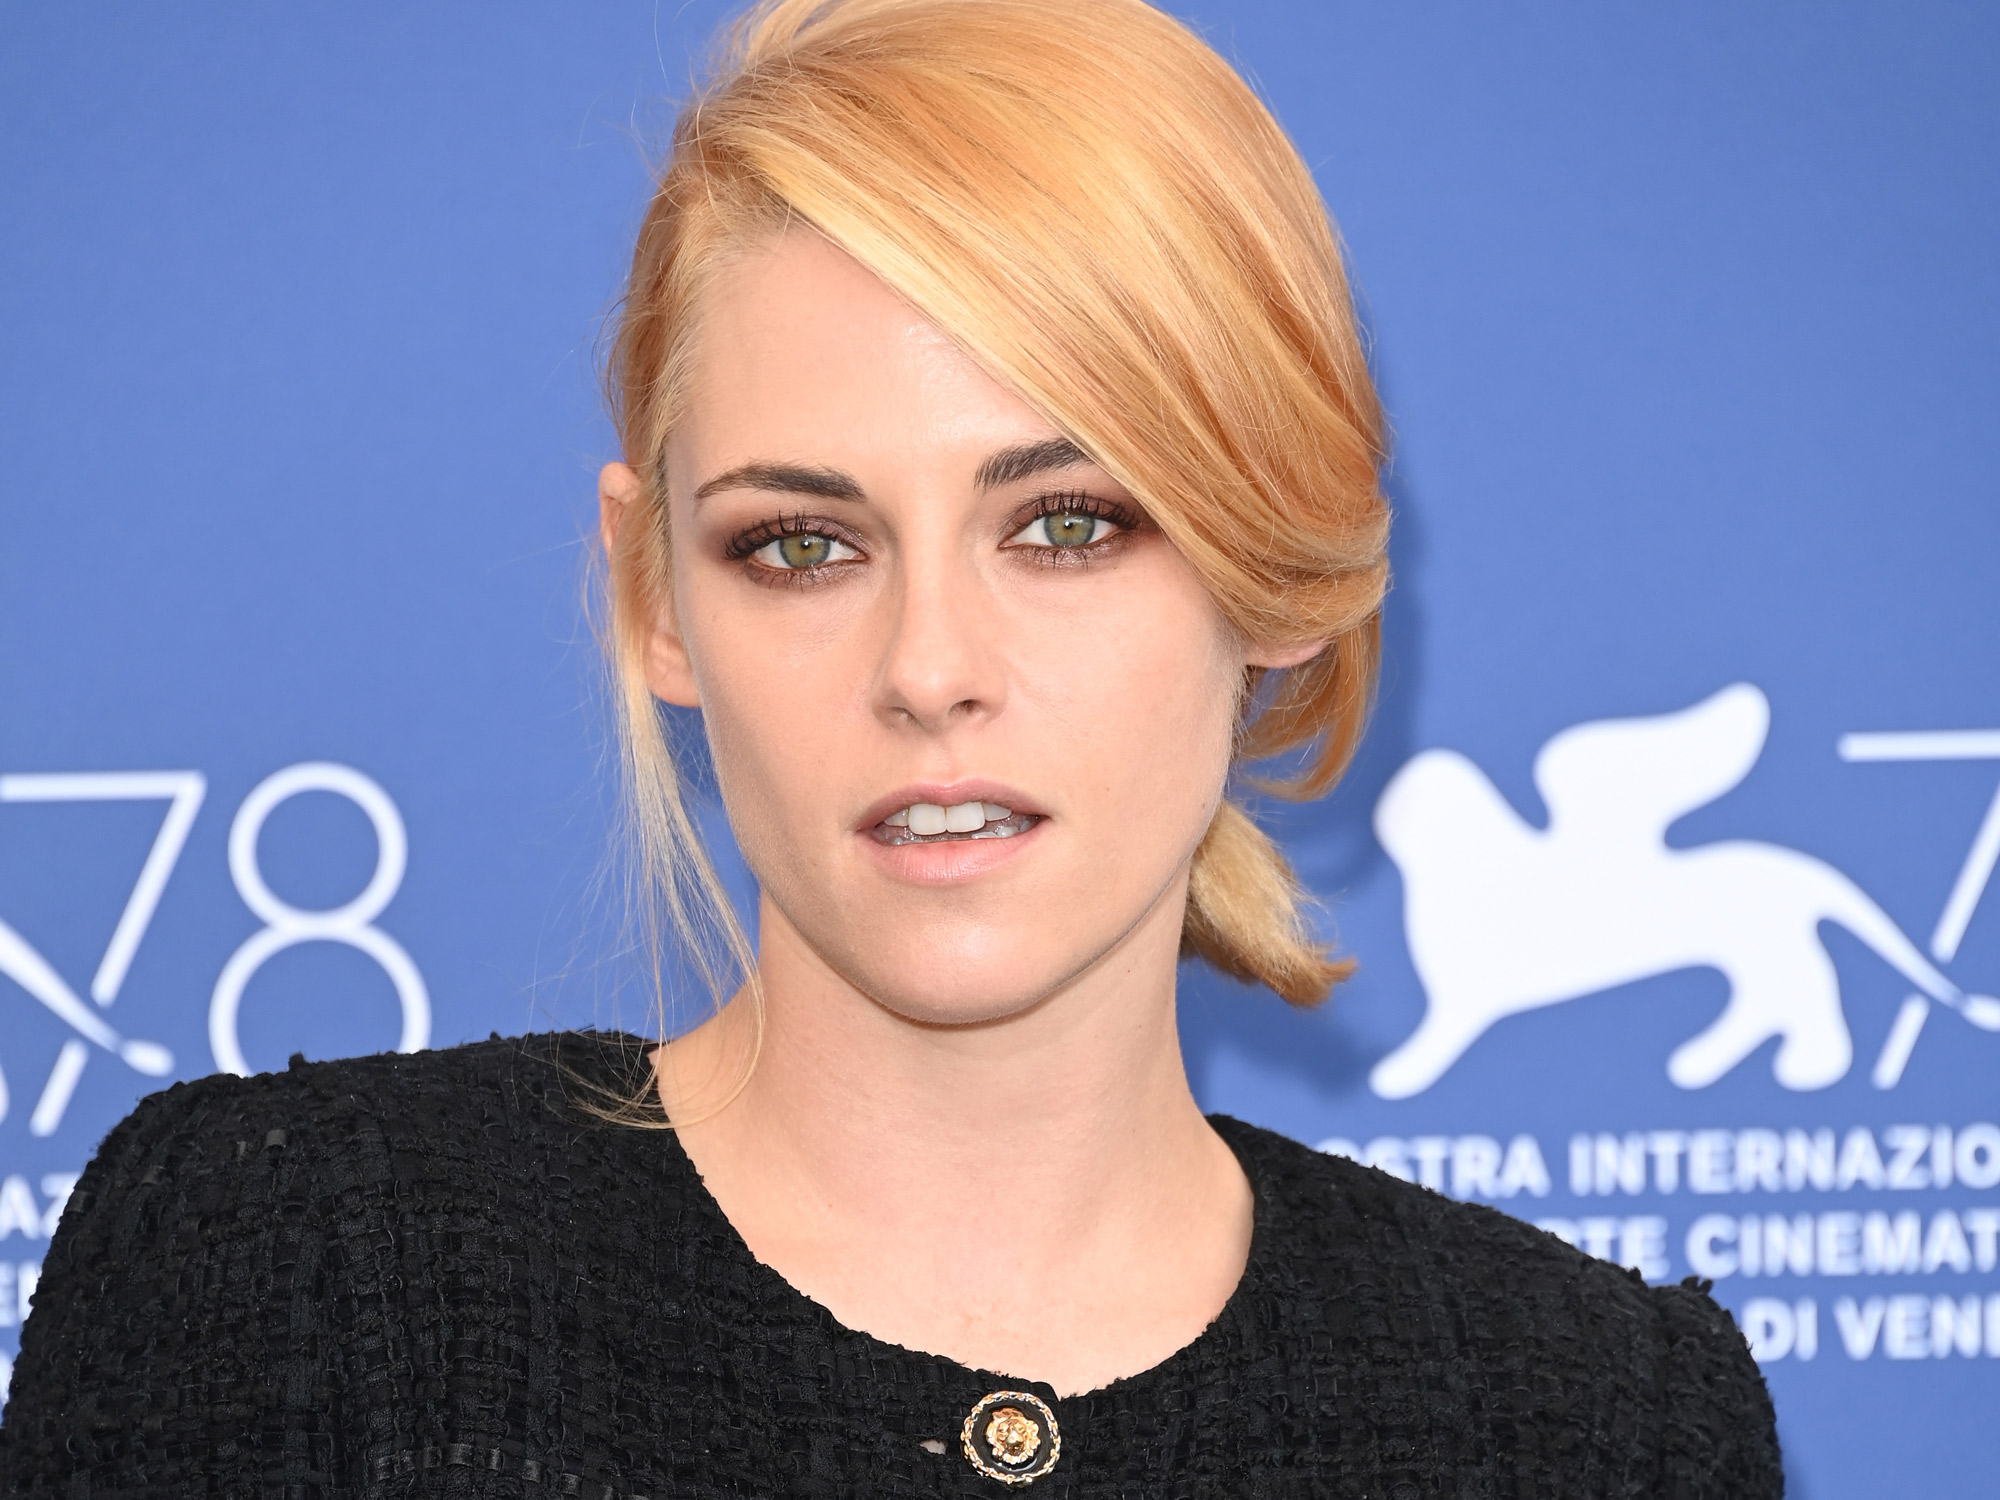 Kristen Stewart on How Playing Princess Diana in 'Spencer' Made Her 'Feel  So Strong